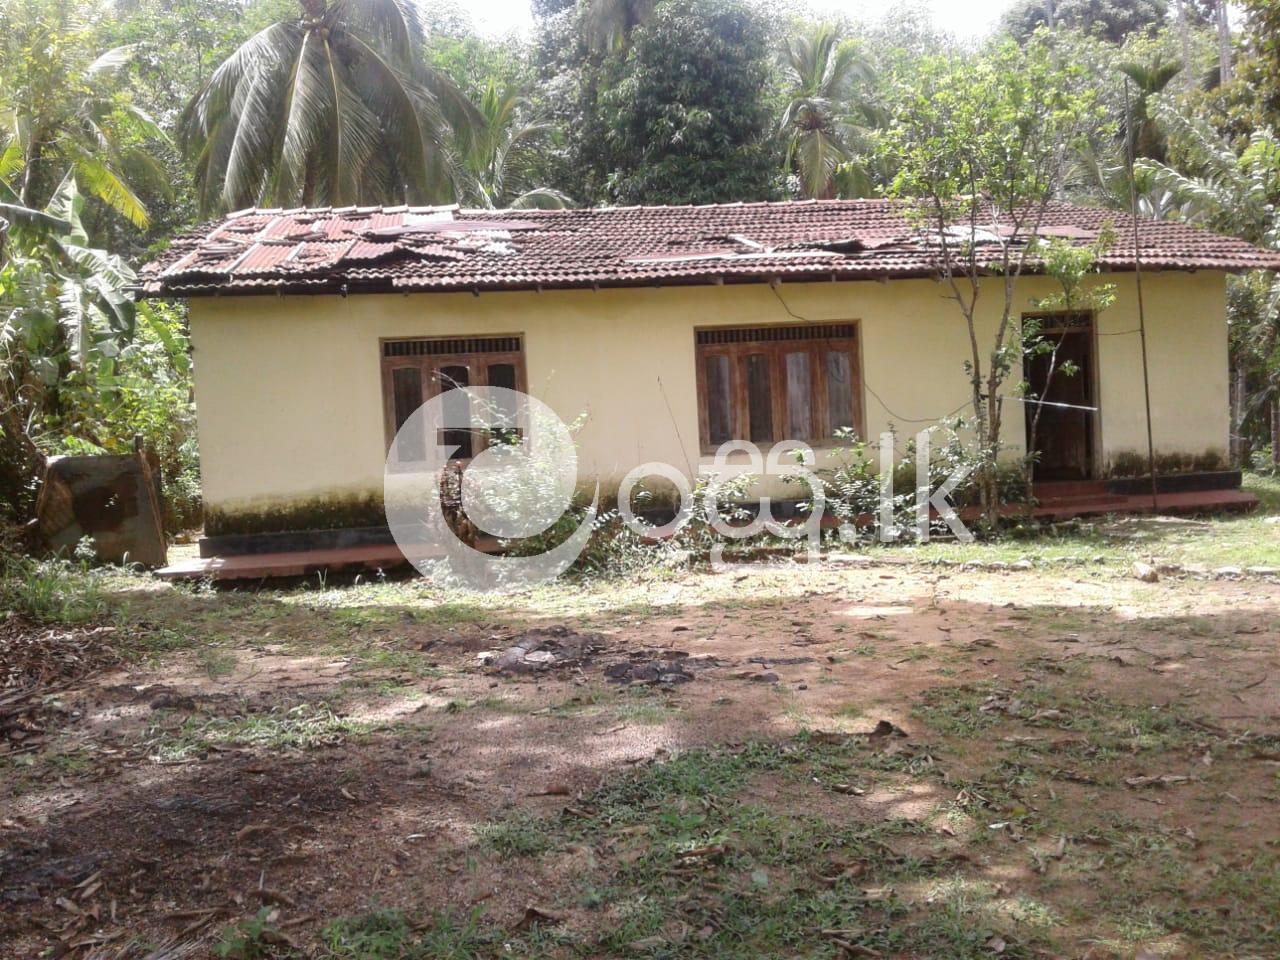 Rubber and Pepper Agriculture Land for Sale in Wellawaya Land in Wellawaya